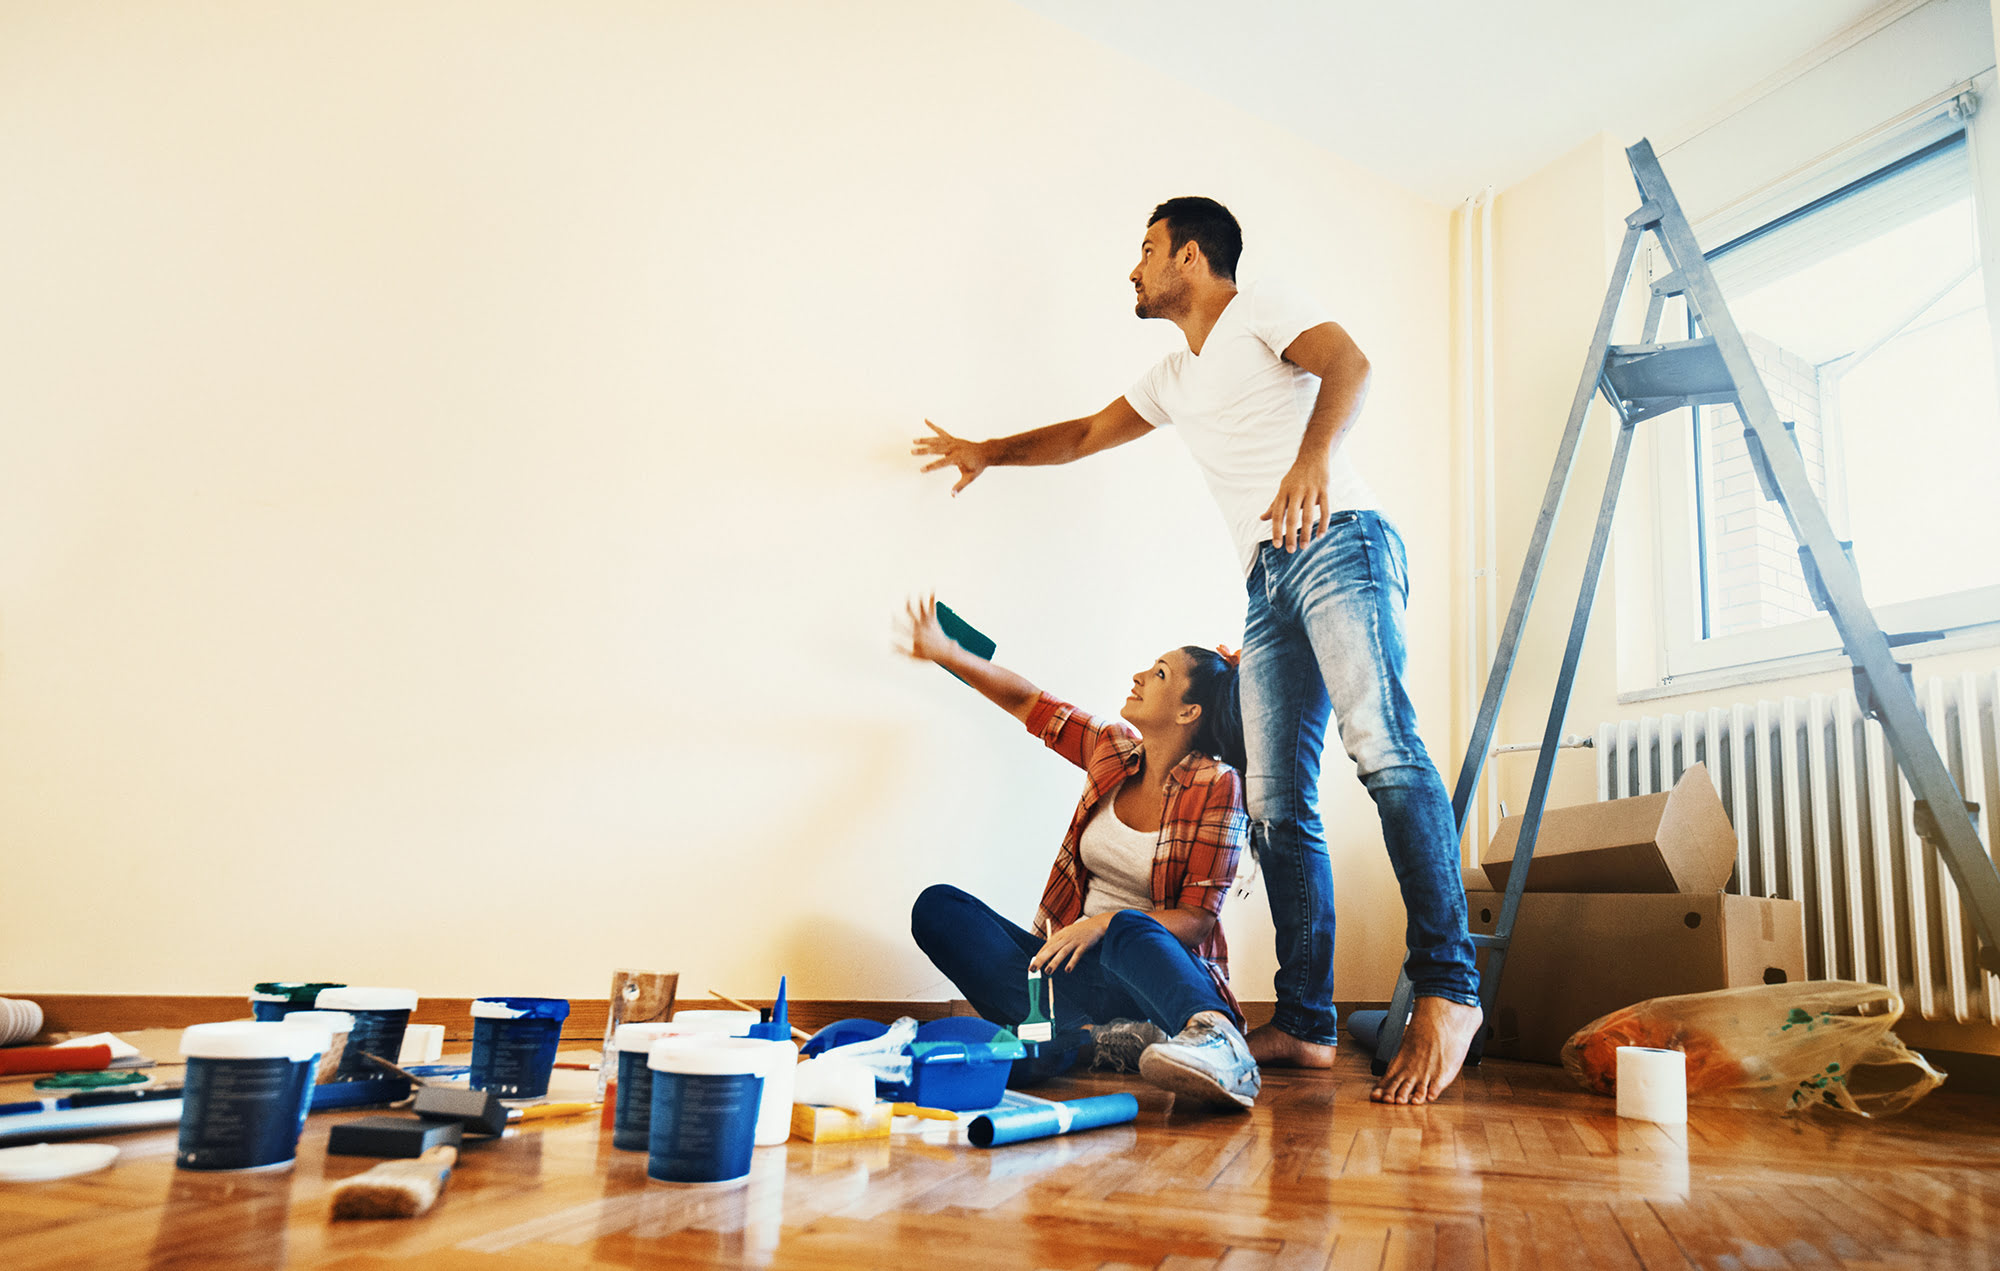 Which Home Improvements Can I Add To The Cost Basis Of My Home?